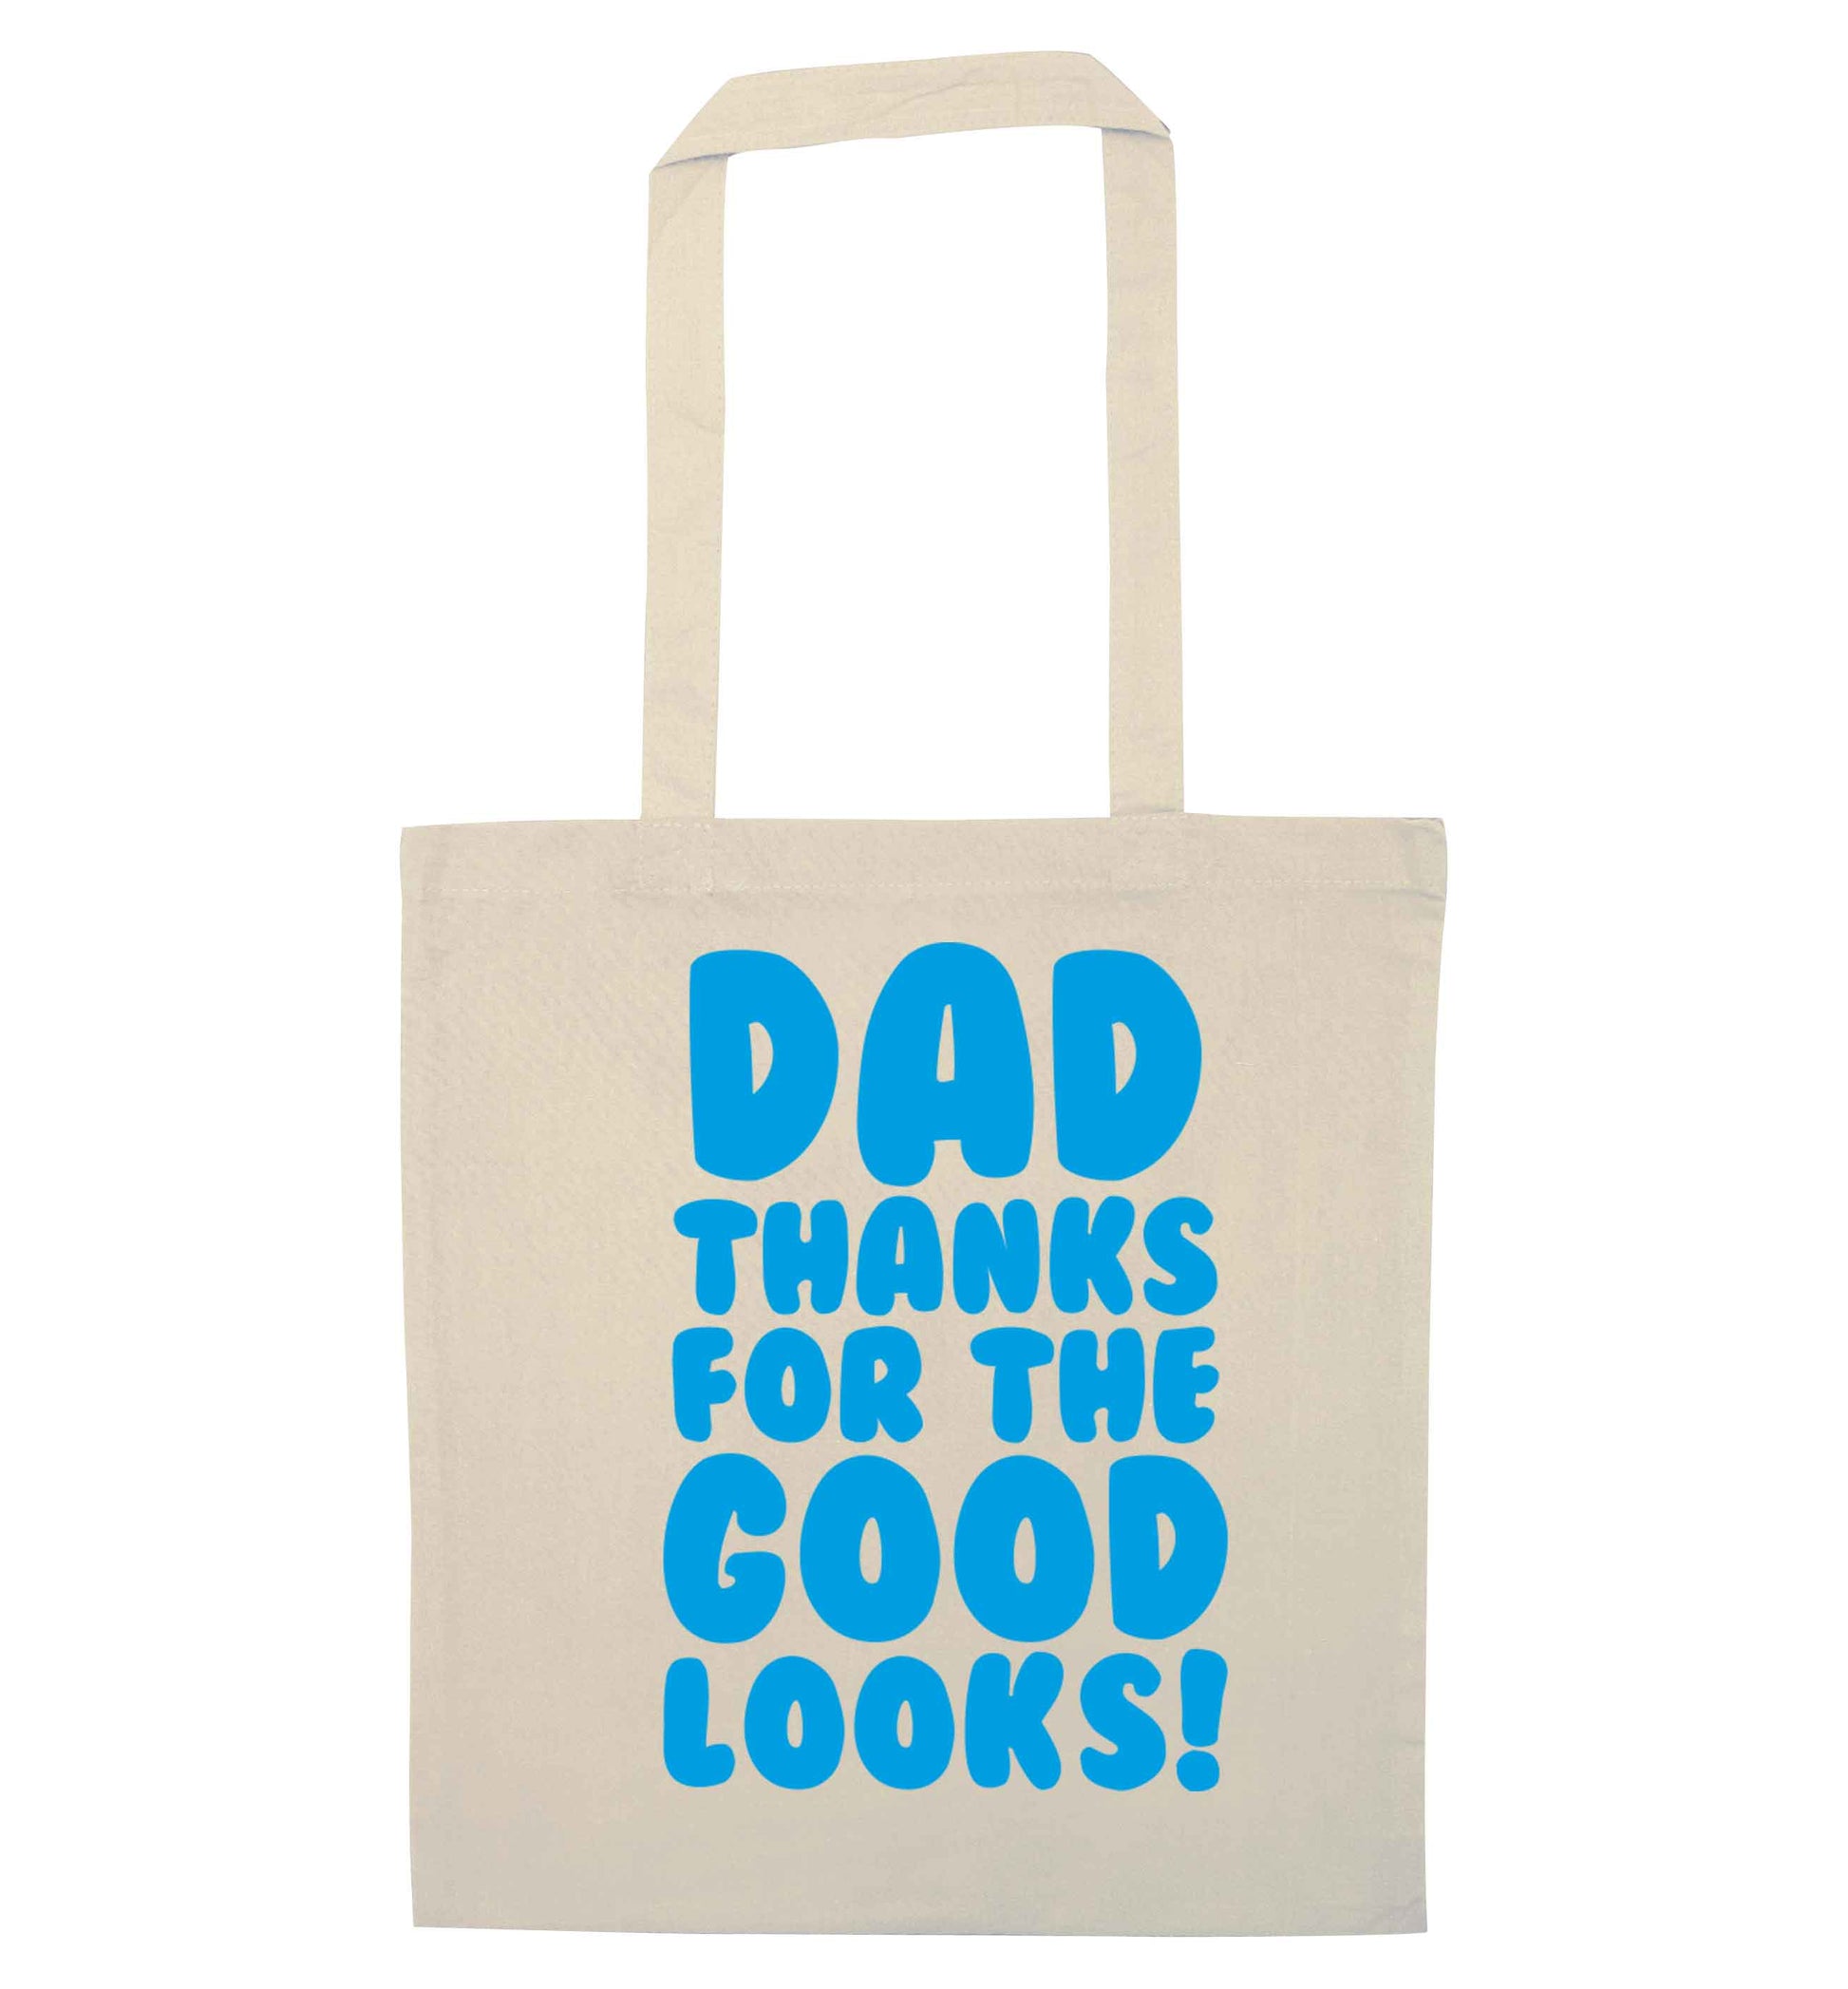 Dad thanks for the good looks natural tote bag